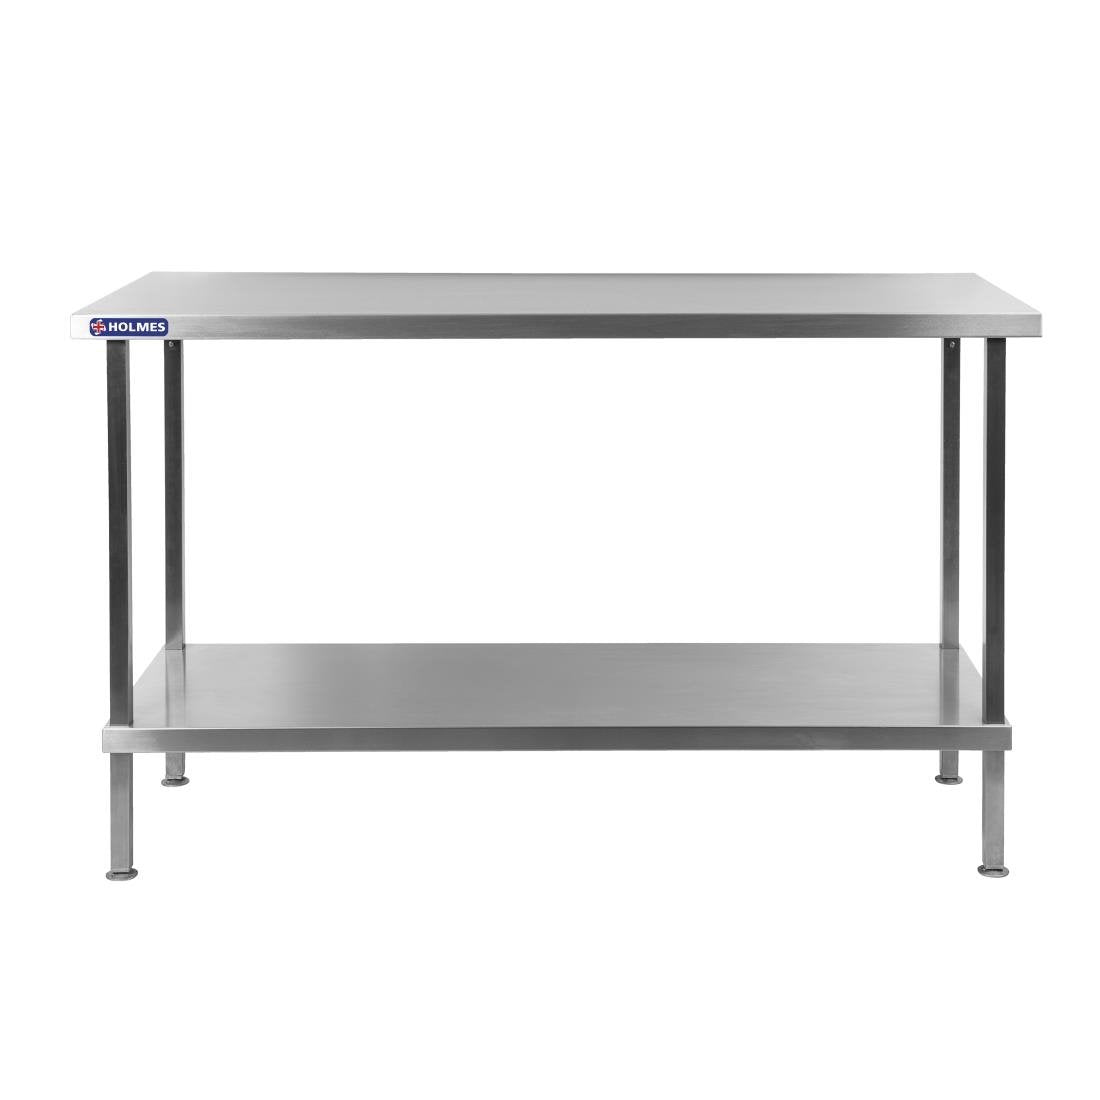 DR052 Holmes Stainless Steel Centre Table 1800mm JD Catering Equipment Solutions Ltd